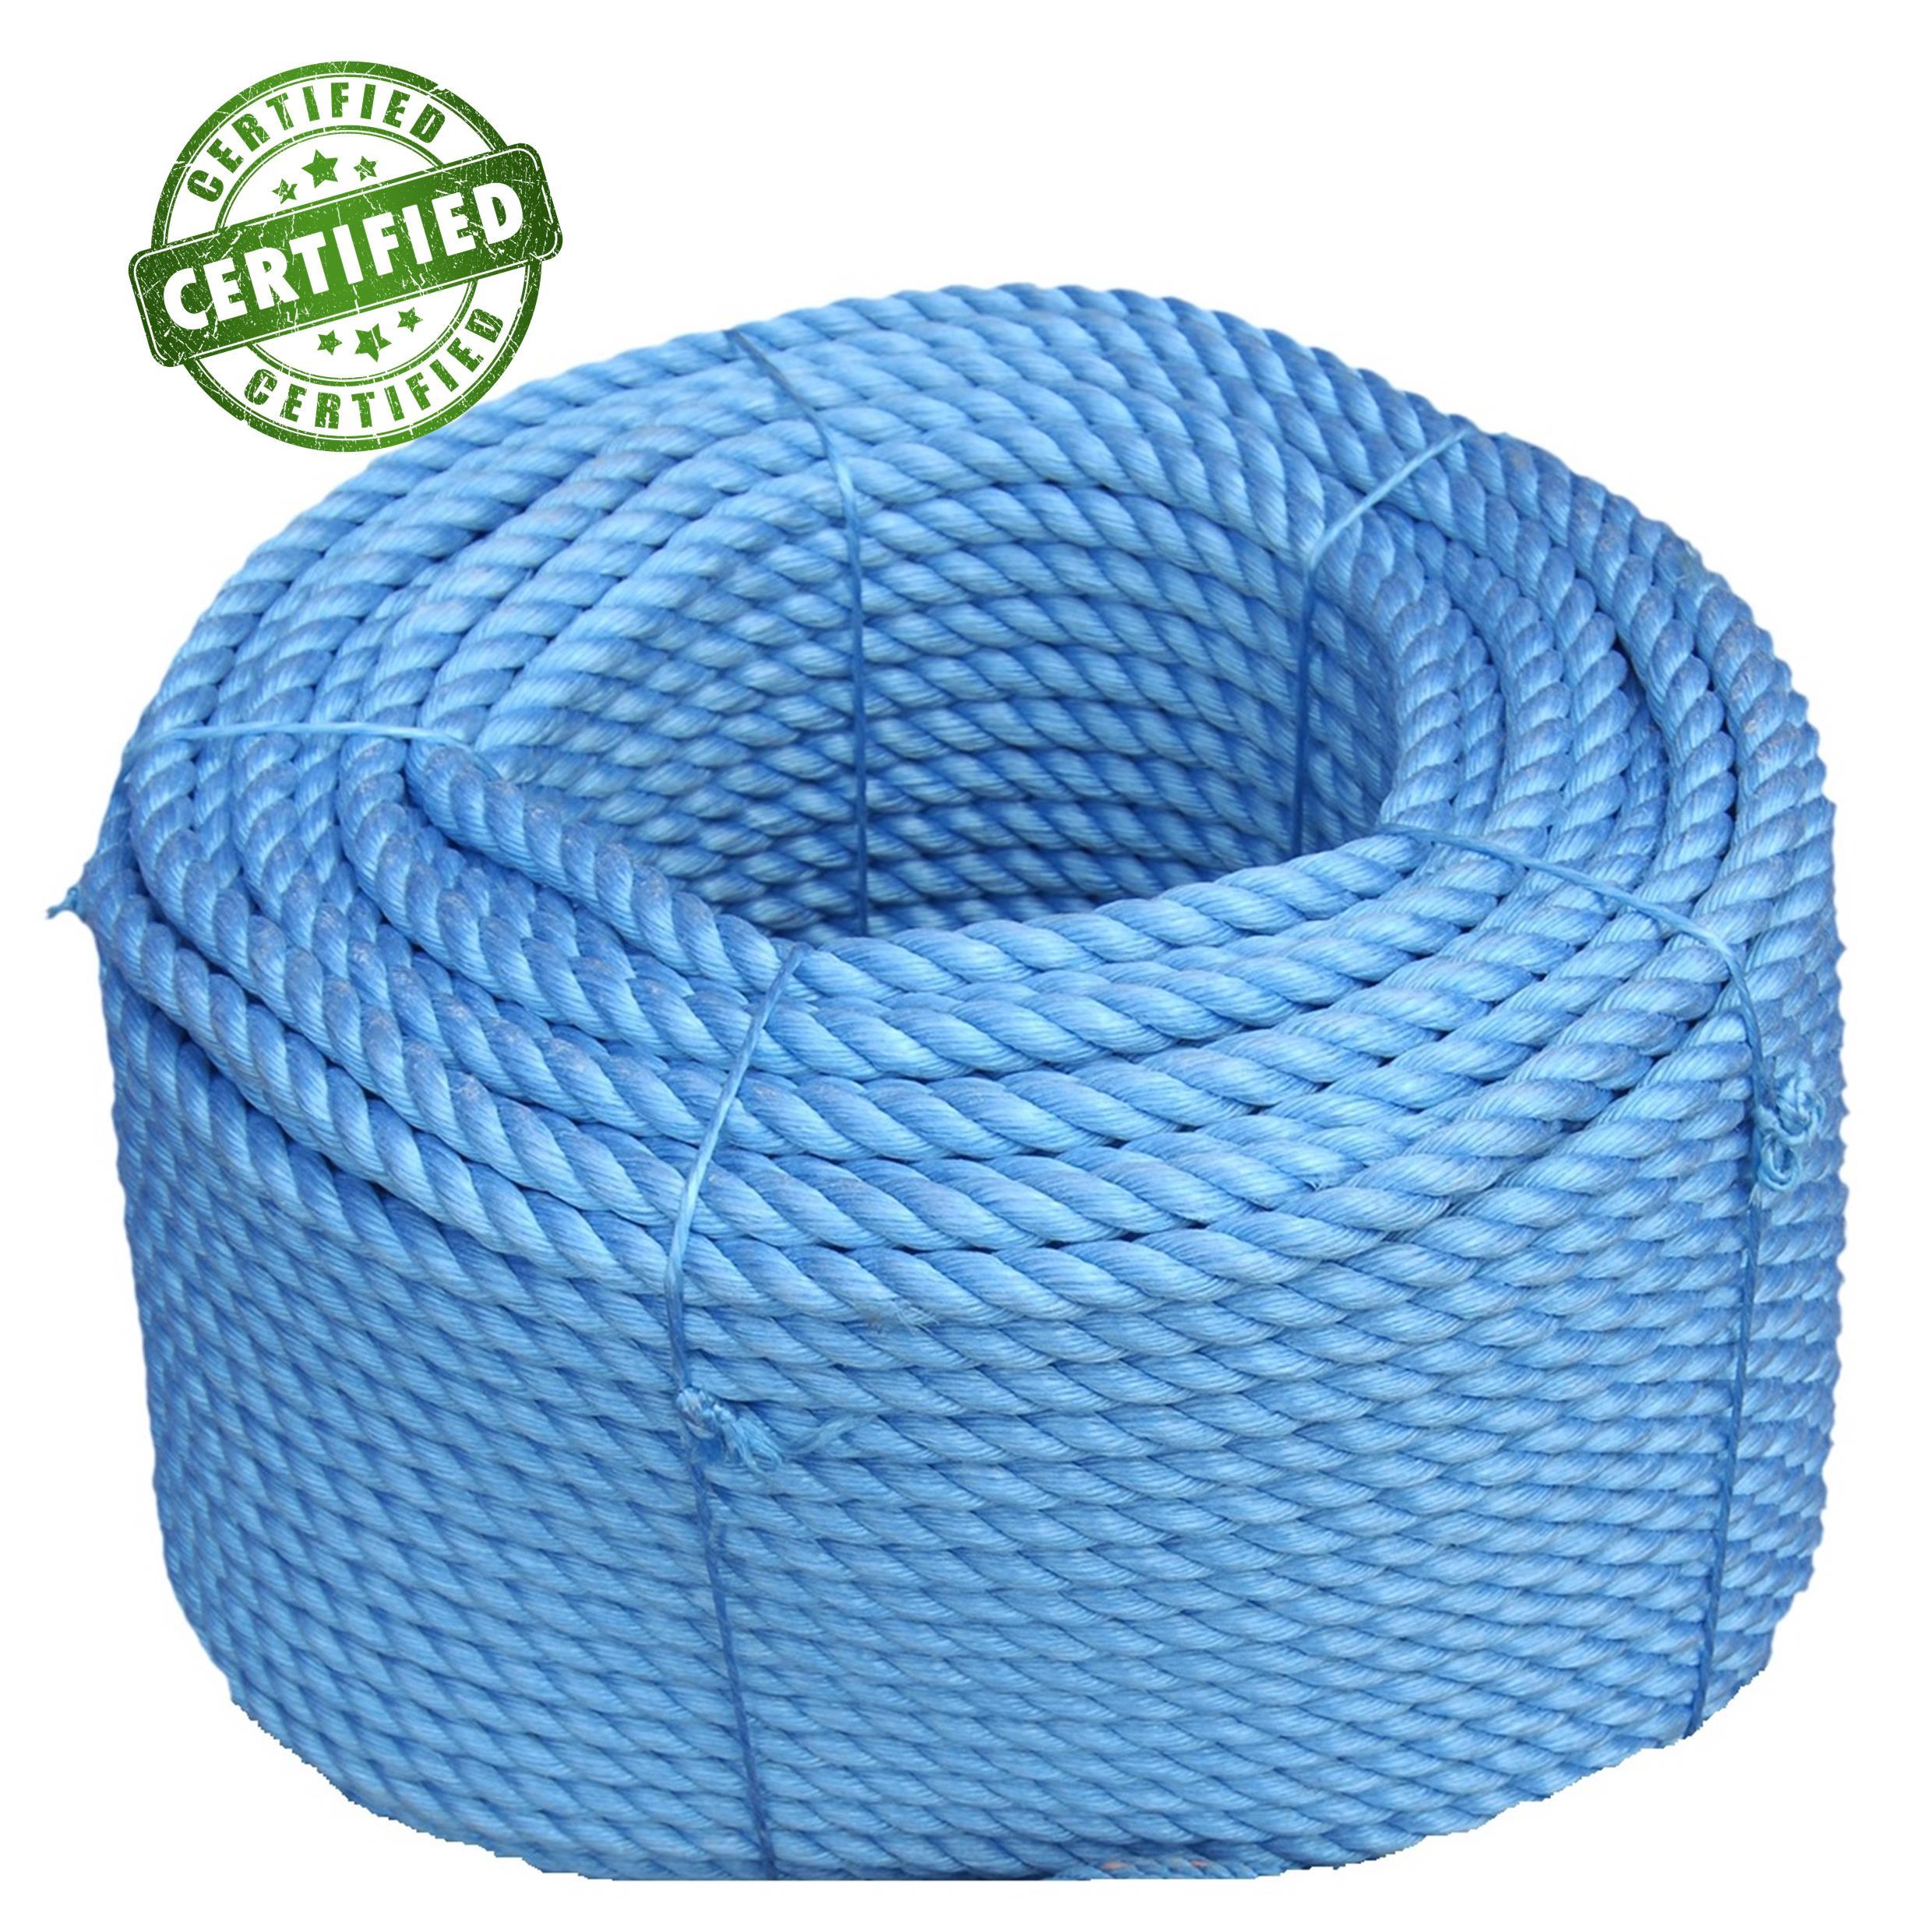 18mm Certified Polypropylene Rope - Strong, Durable Scaffolding